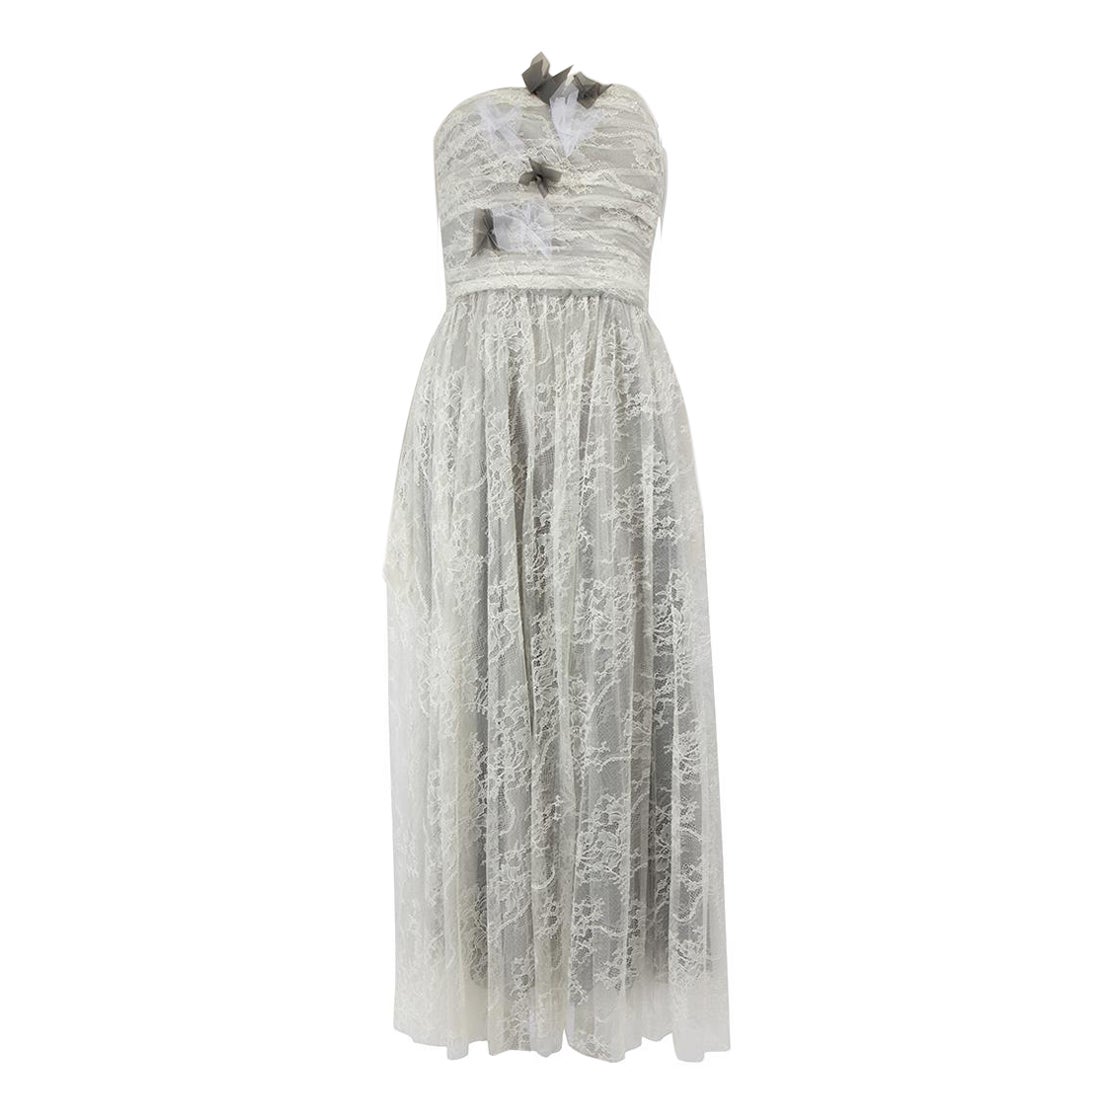 Honayda White Floral Lace Maxi Dress Size XL For Sale